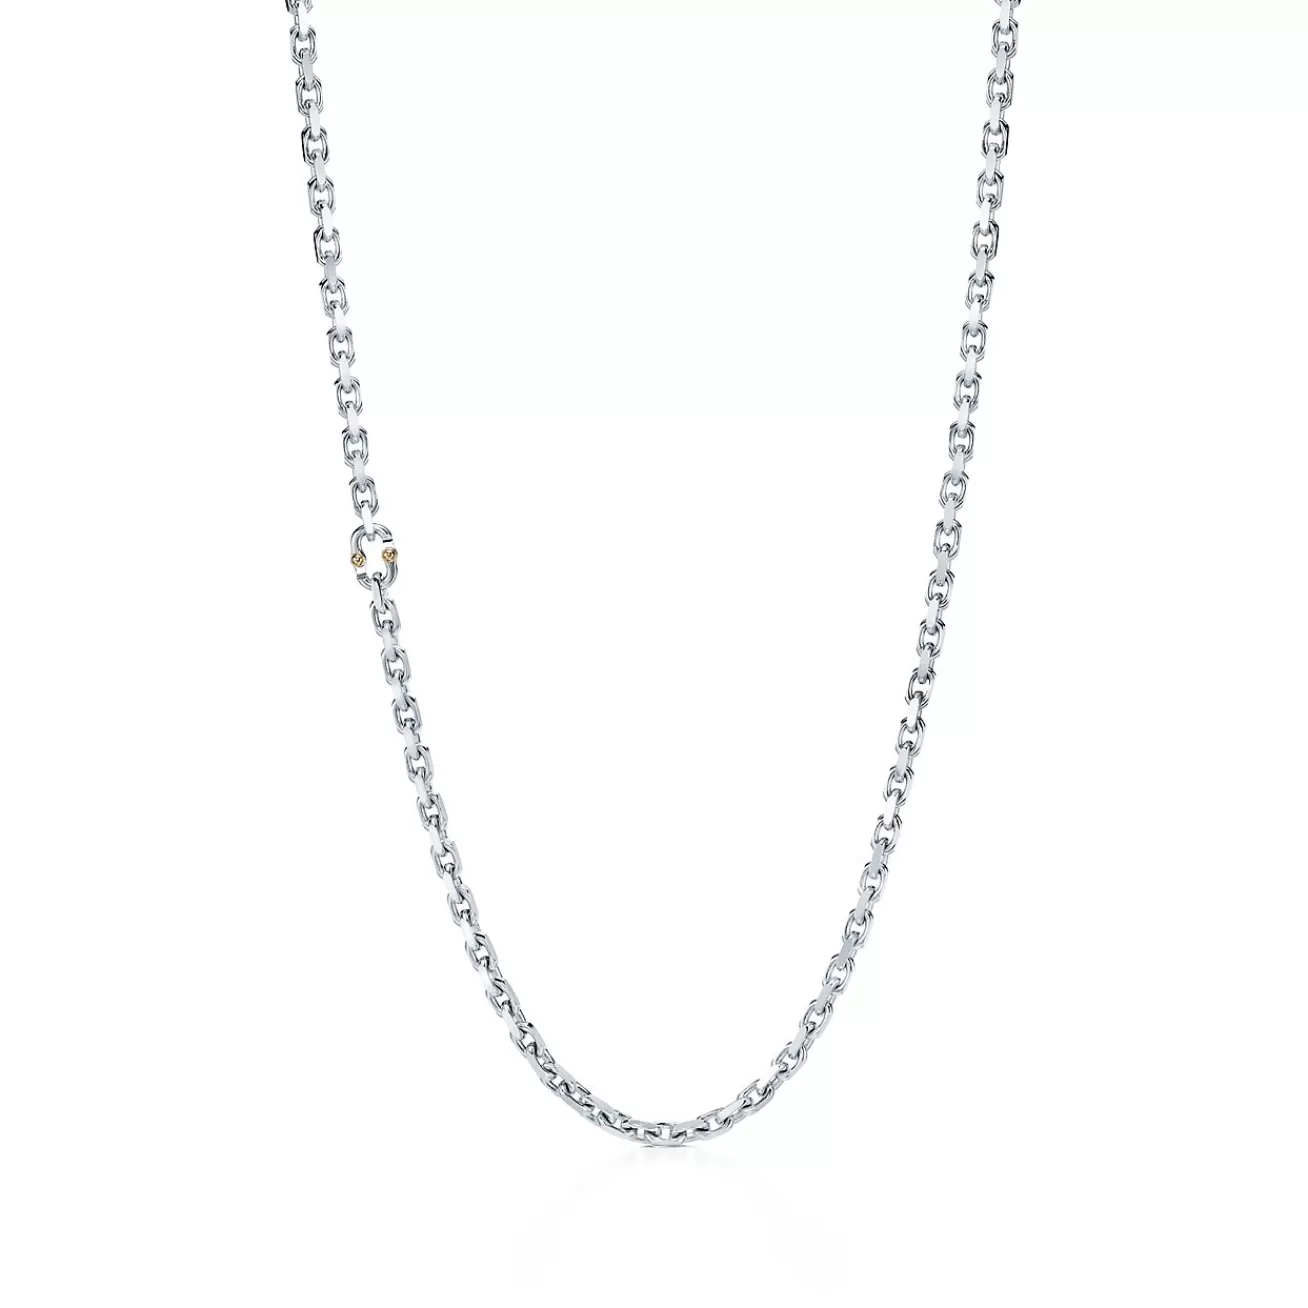 Tiffany & Co. Tiffany 1837® Makers chain necklace in sterling silver and 18k gold, 24". | ^ Necklaces & Pendants | Men's Jewelry